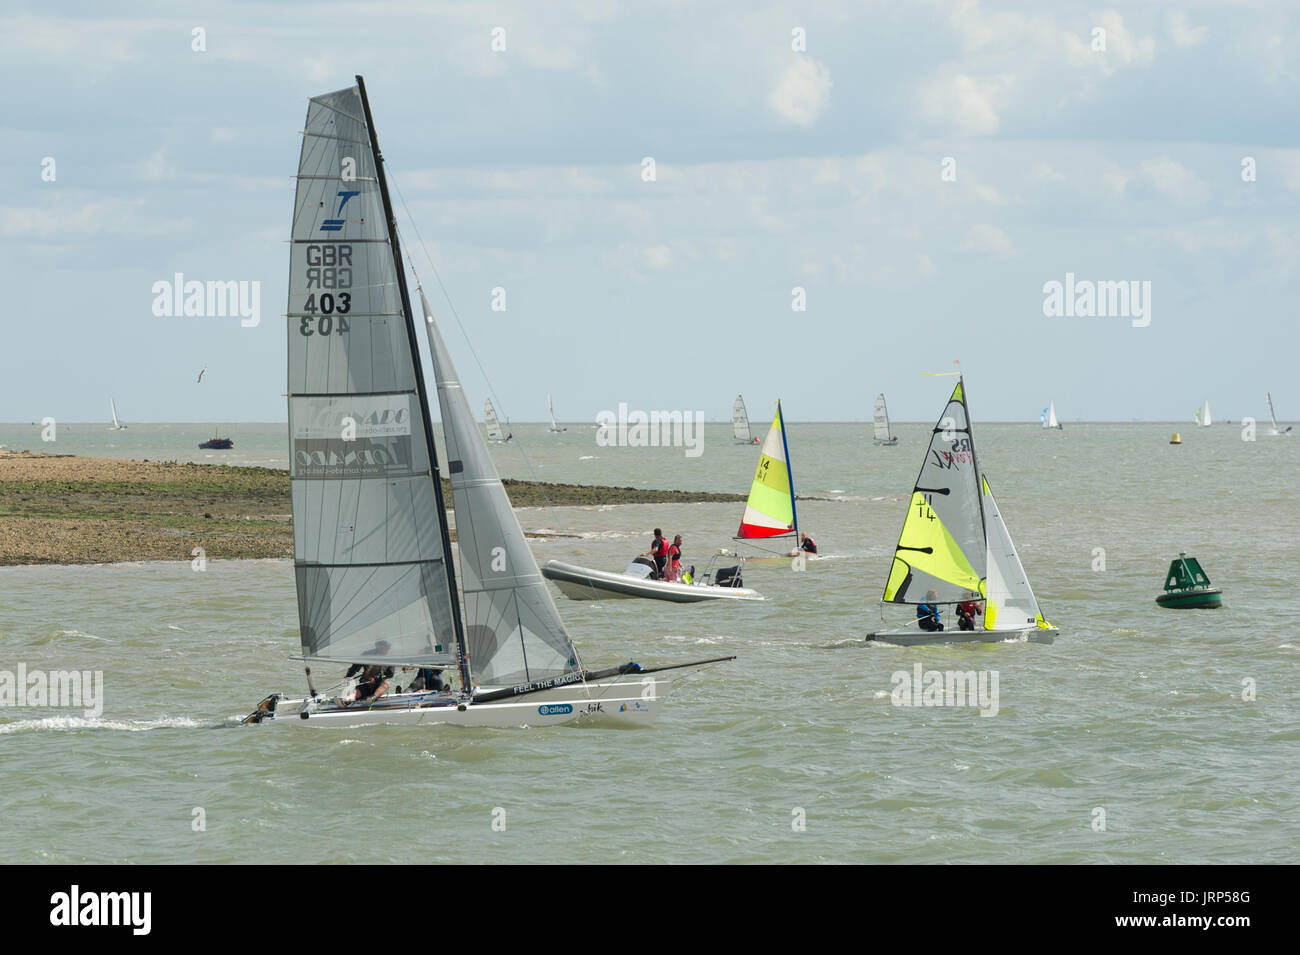 Brightlingsea, Essex, UK, 6 August 2017  Dinghy sailors competing in Pyefleet Week racing at Brightlingsea Sailing Club on the Colne Estuary in Essex. Pyefleet Week, whose main sponsor for a second year is  Learning & Skills Solutions, is one of the UK’s premier dinghy and day boat regattas and is the largest of its type on the East Coast, with up to 150 entries annually. Credit: Gary Eason/Alamy Live News Stock Photo